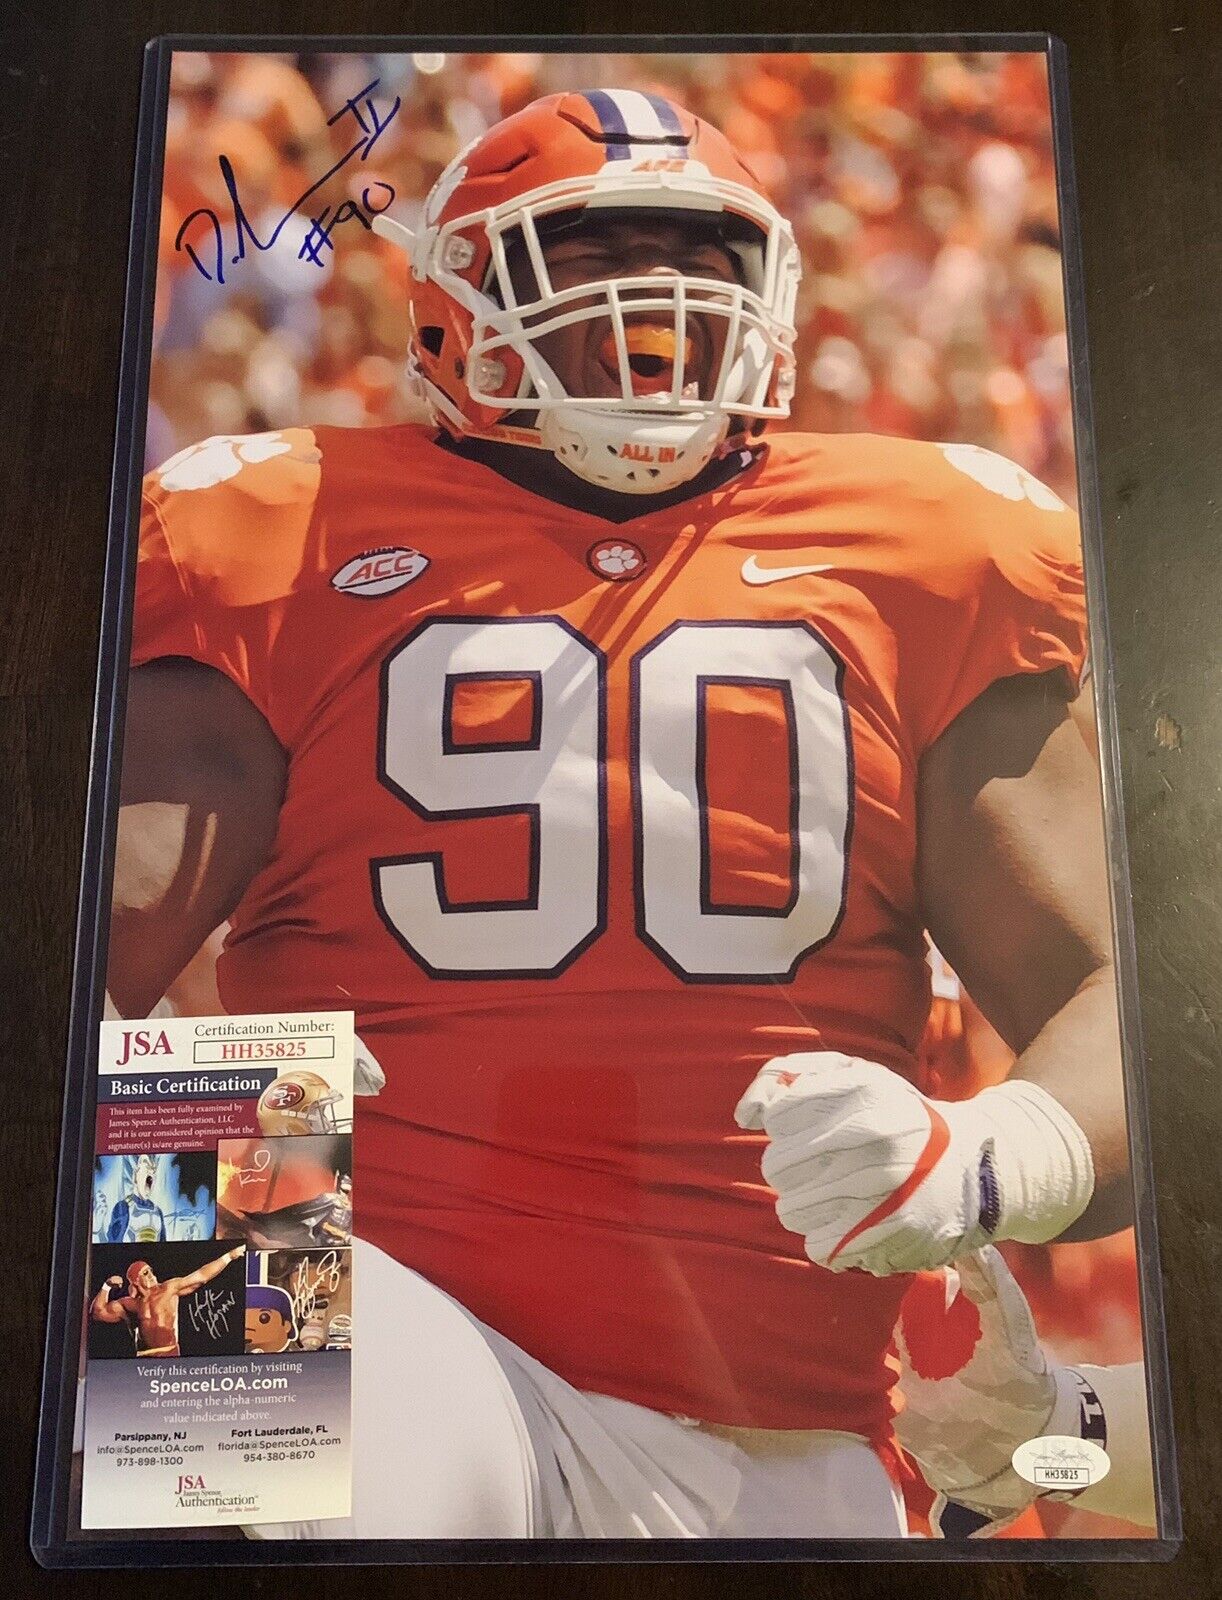 DEXTER LAWRENCE 11x17 Signed Photo Poster painting CLEMSON TIGERS FOOTBALL JSA/COA HH35825